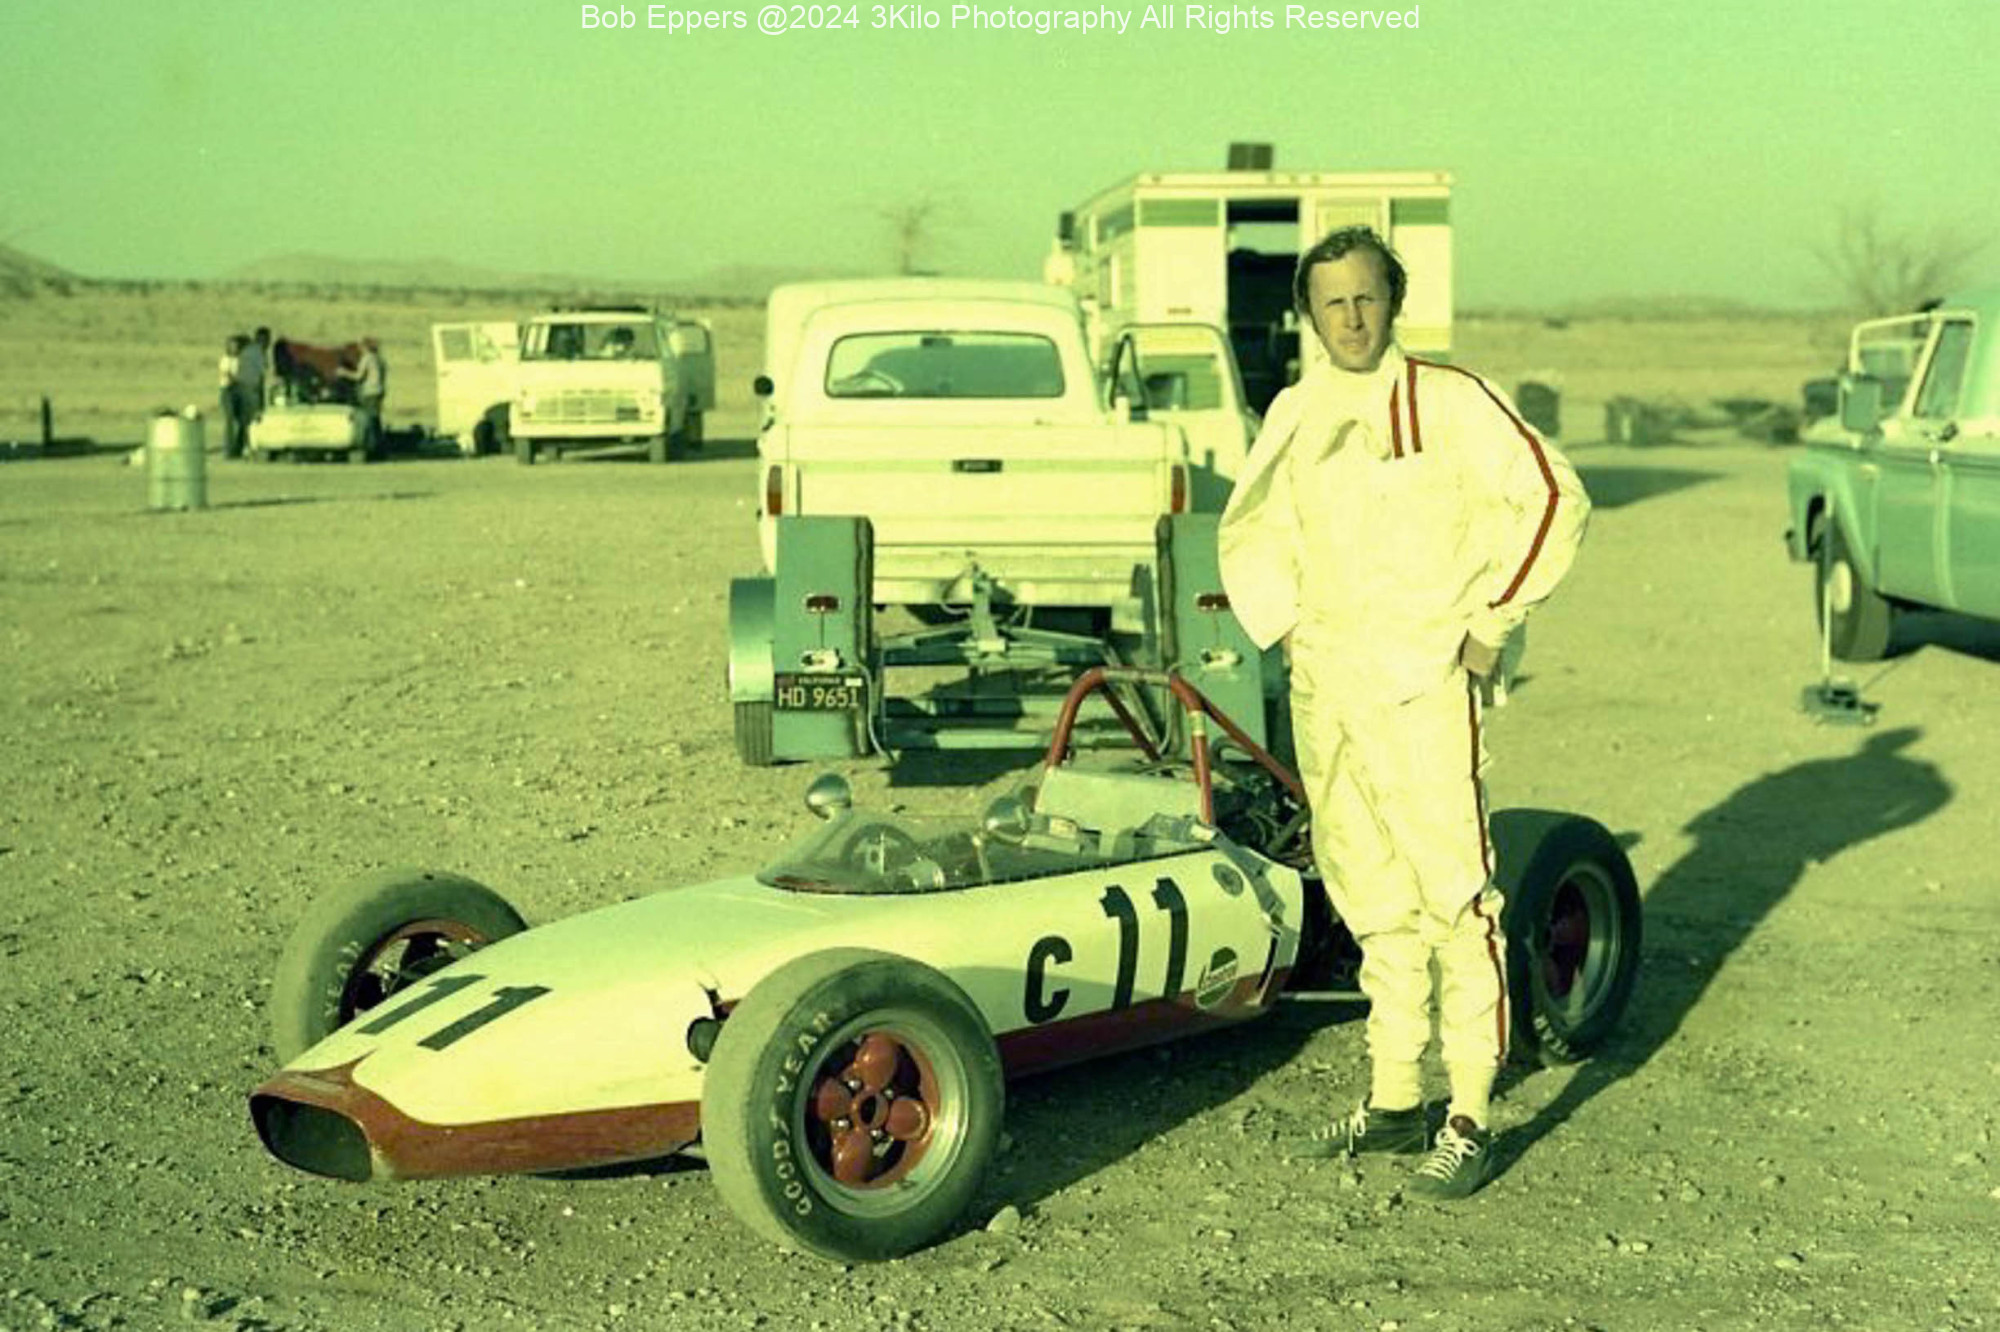 Photo of myself and my Formula C car at Willow Springs